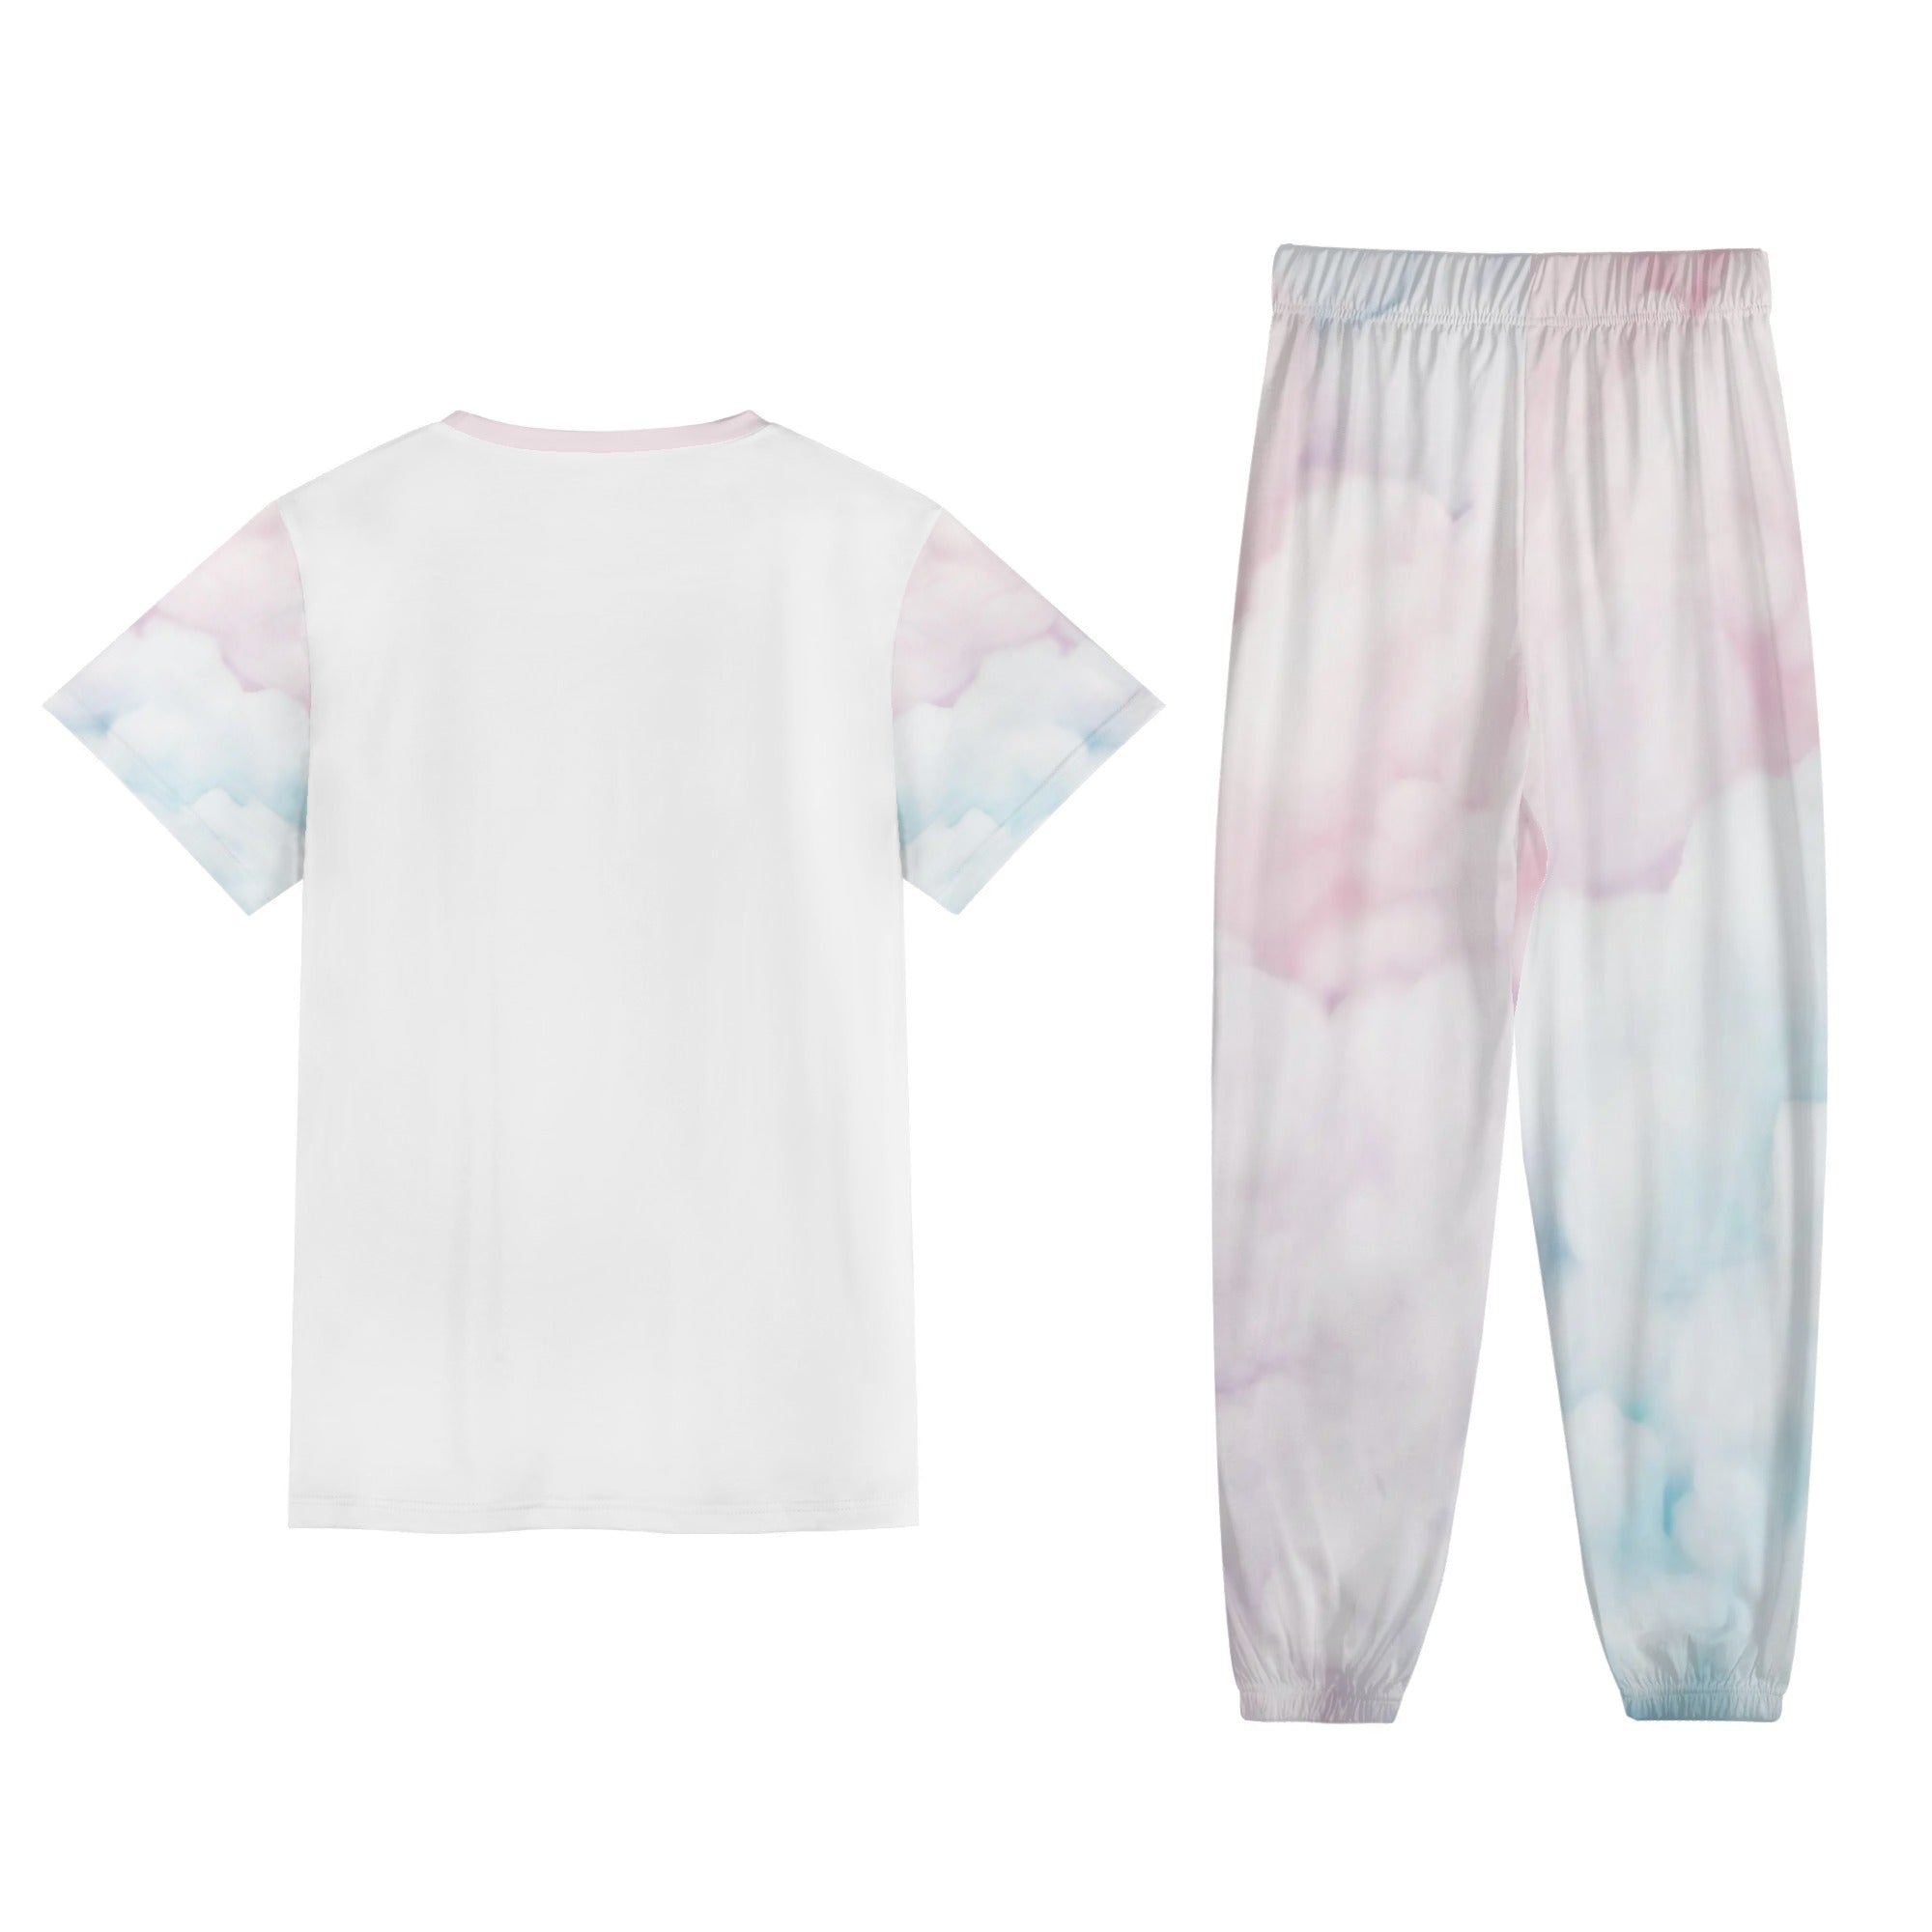 - Cotton Candy Stylie Teens and Womens Short Sleeve Sports Outfit Set - at TFC&H Co.